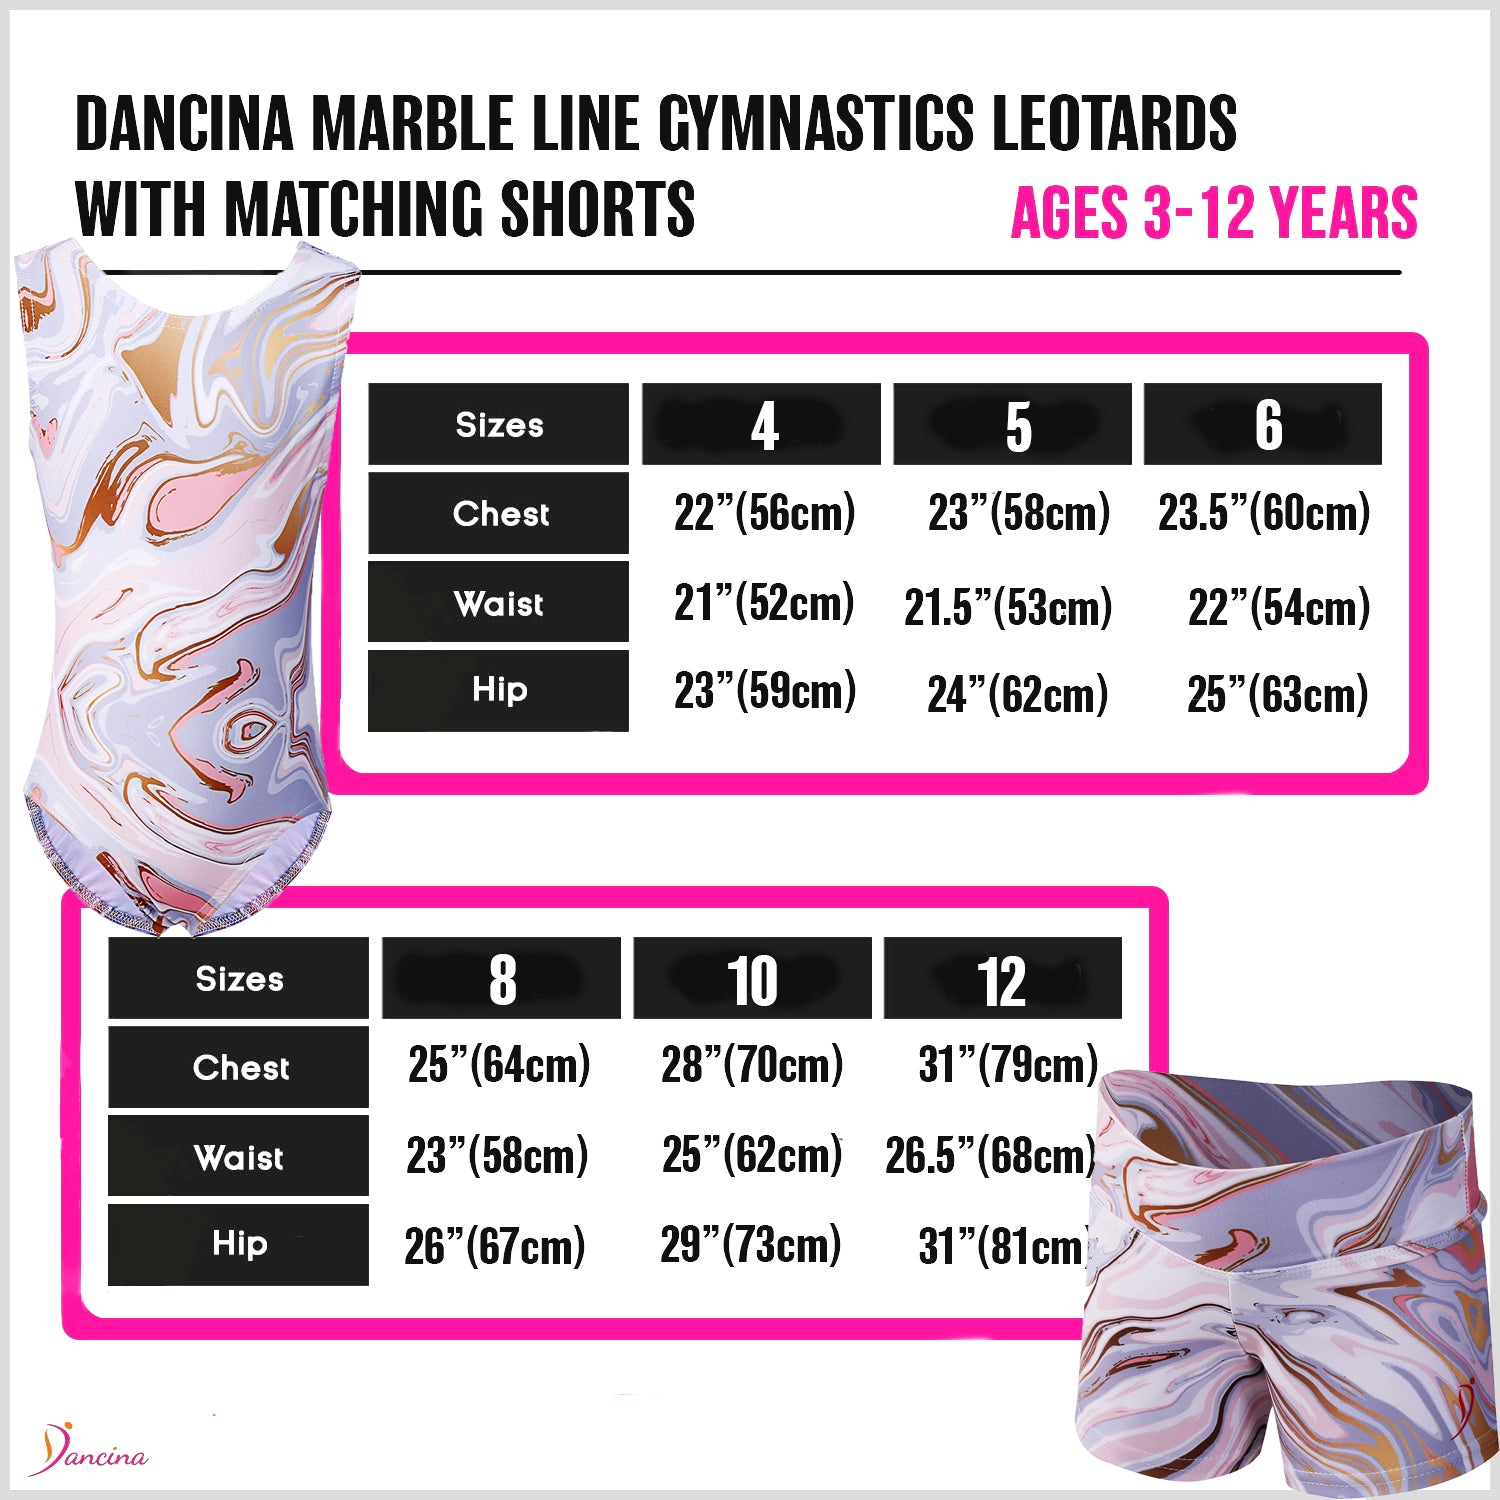 Dancina Marble Line Gymnastics Outfit Sizing Chart